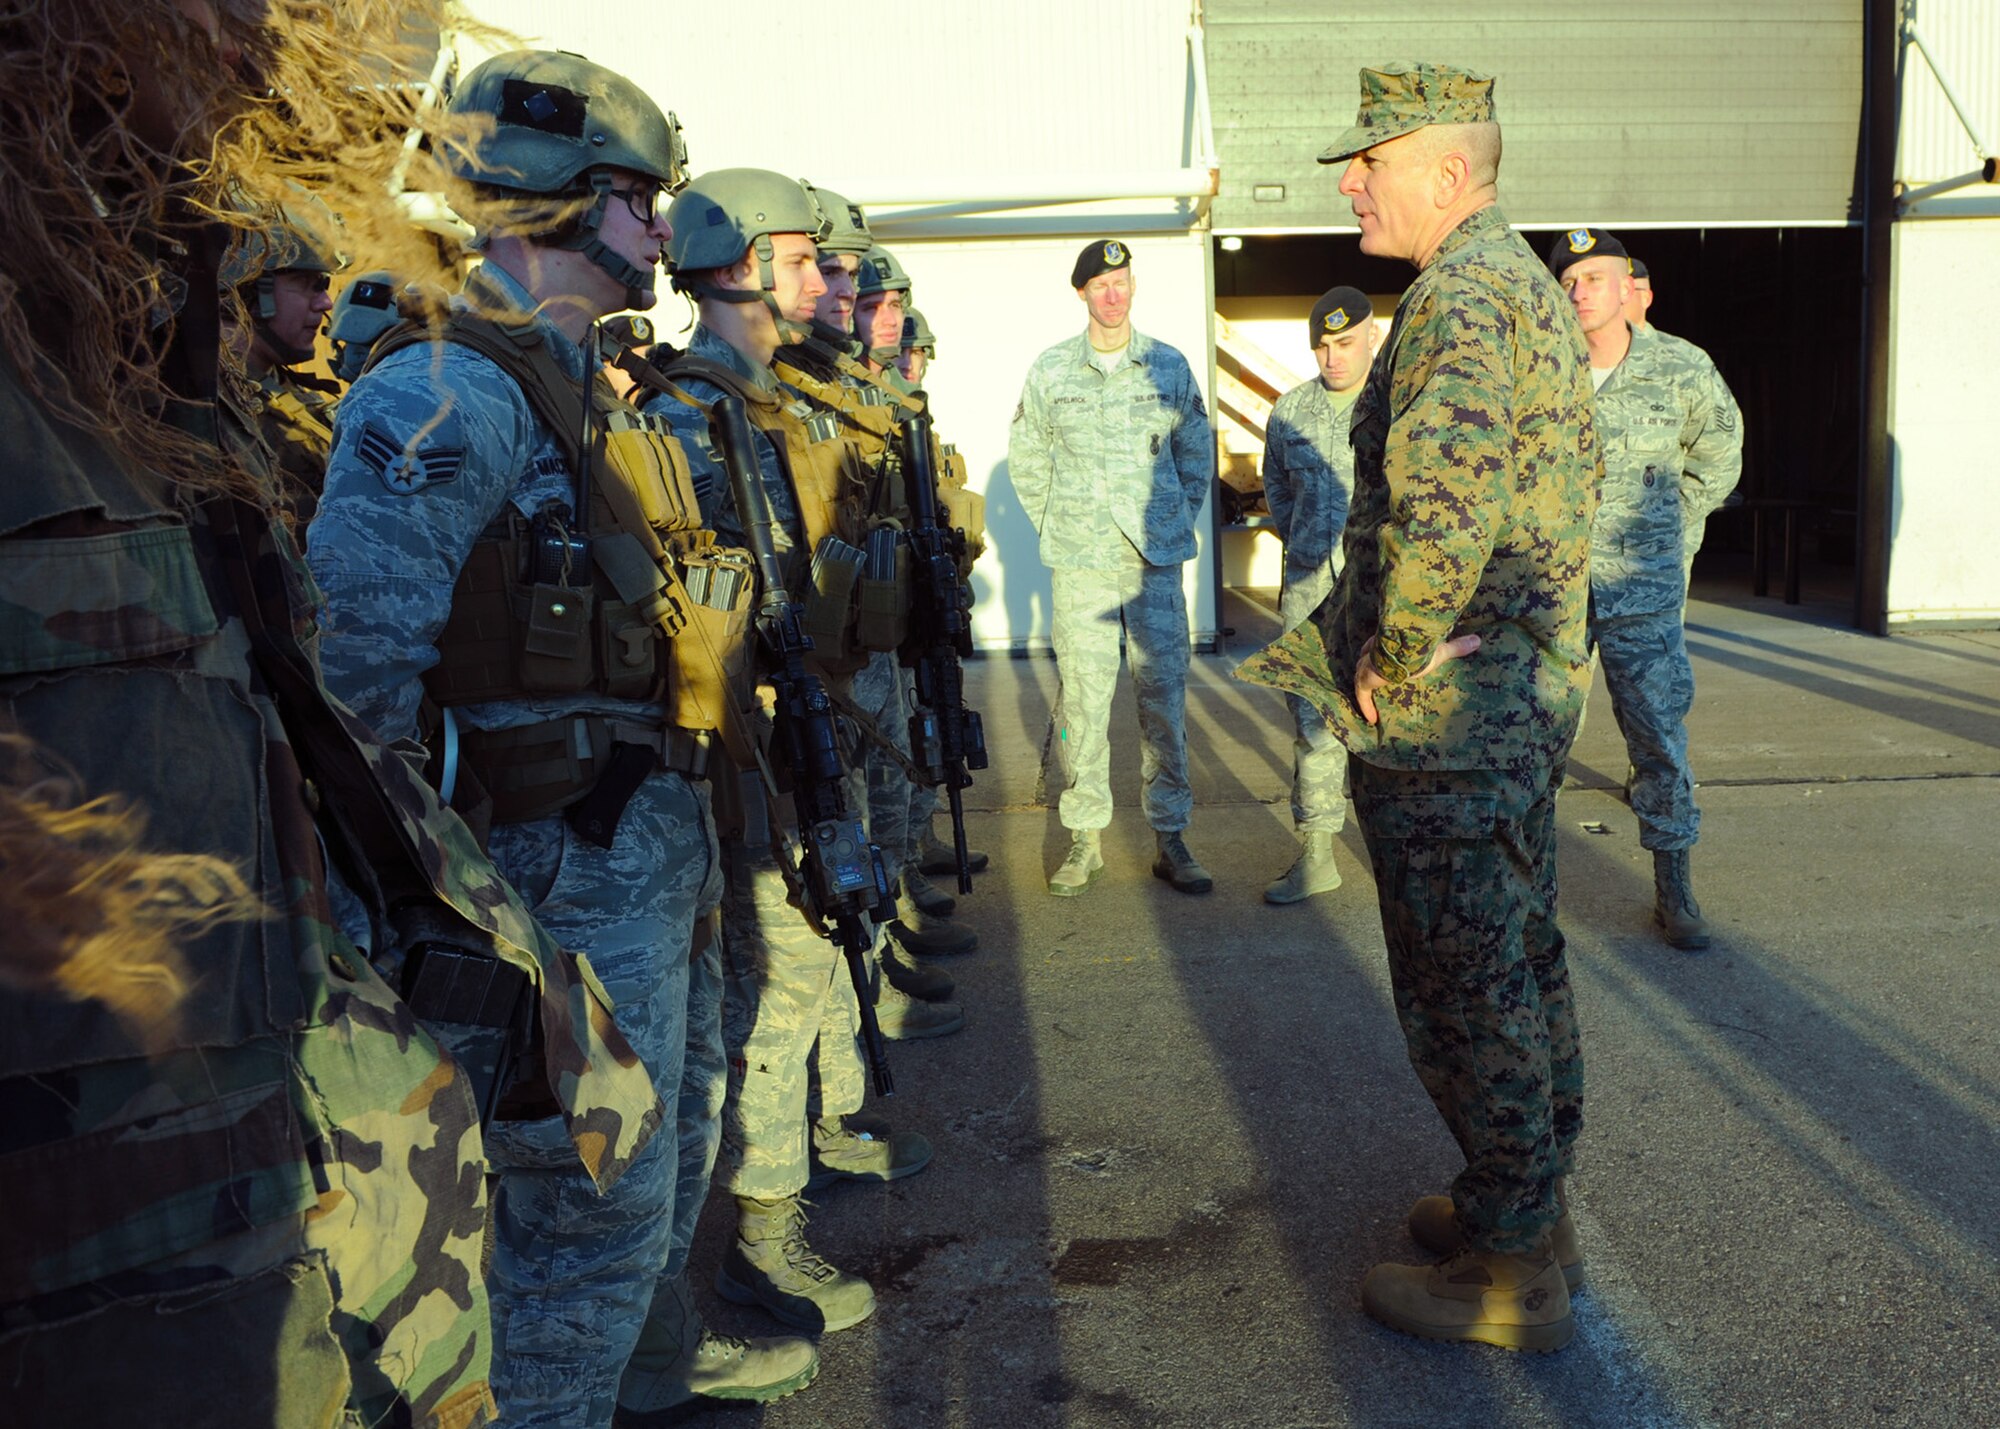 Marine Corps Sgt. Maj. Bryan B. Battaglia, the senior enlisted advisor to the chairman of the Joint Chiefs of Staff, talks to 341st Security Forces Group Tactical Response Force members in formation at the TRF shoot house Jan. 17. Battaglia visited Malmstrom Air Force Base, Mont., Jan. 15 to 18 to meet with enlisted Airmen and their families, and Great Falls community members. (U.S. Air Force photo/Senior Katrina Heikkinen)